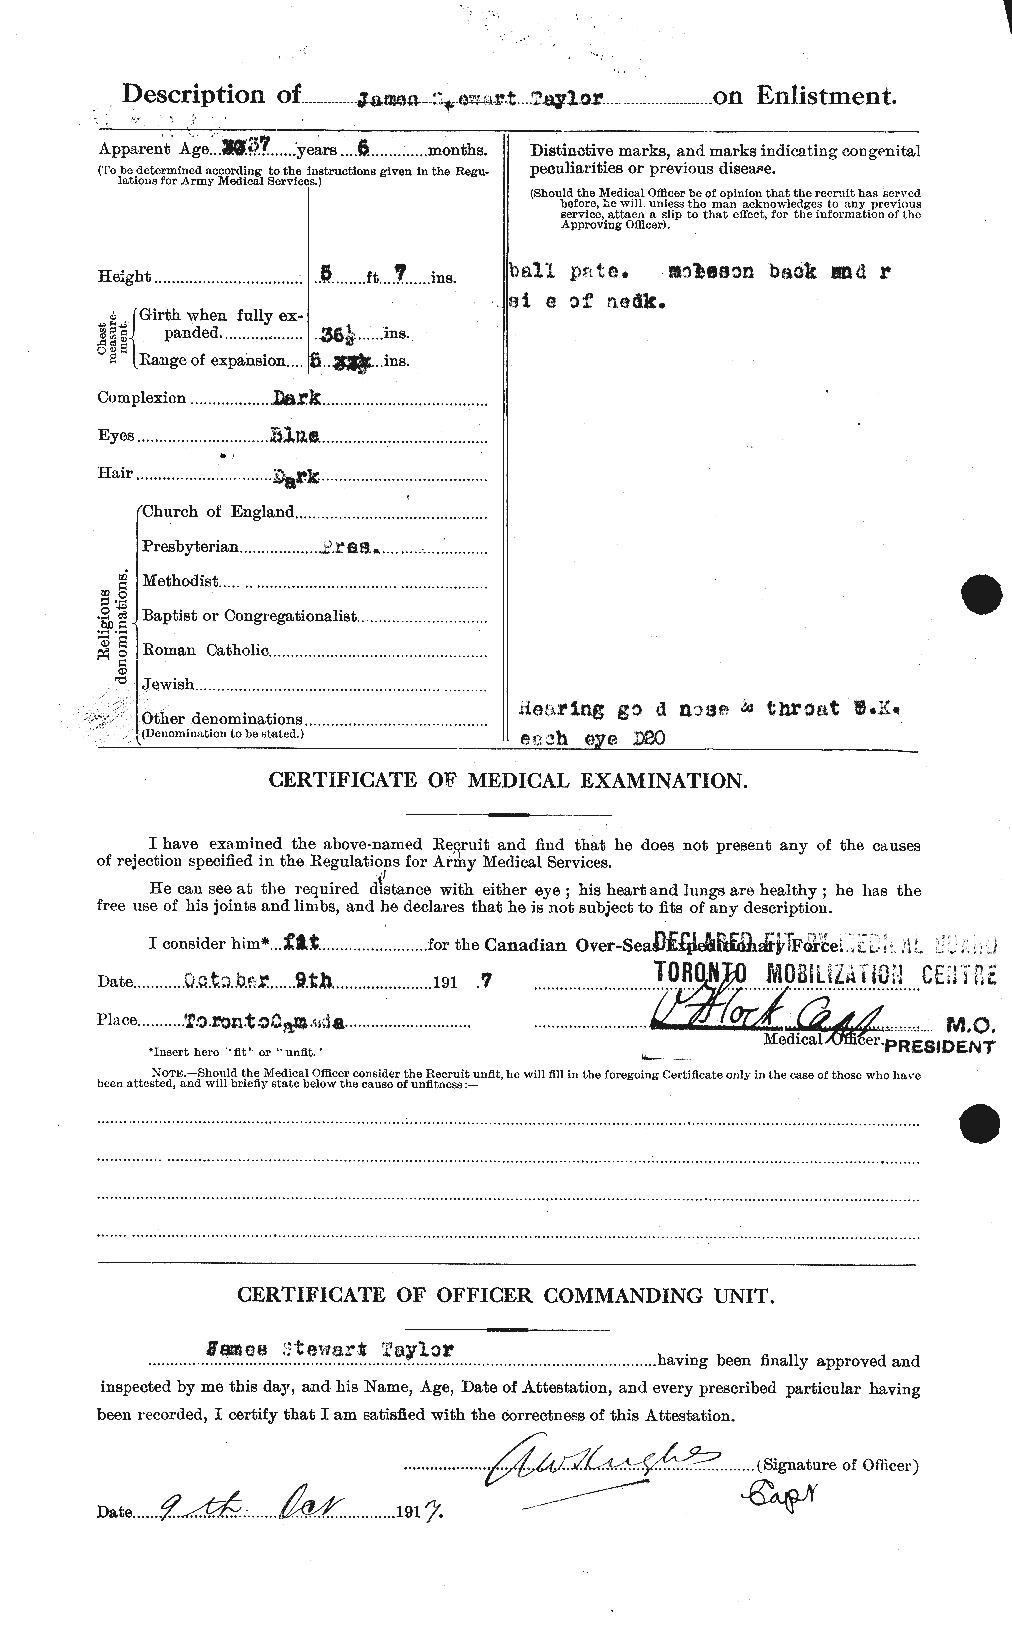 Personnel Records of the First World War - CEF 626956b